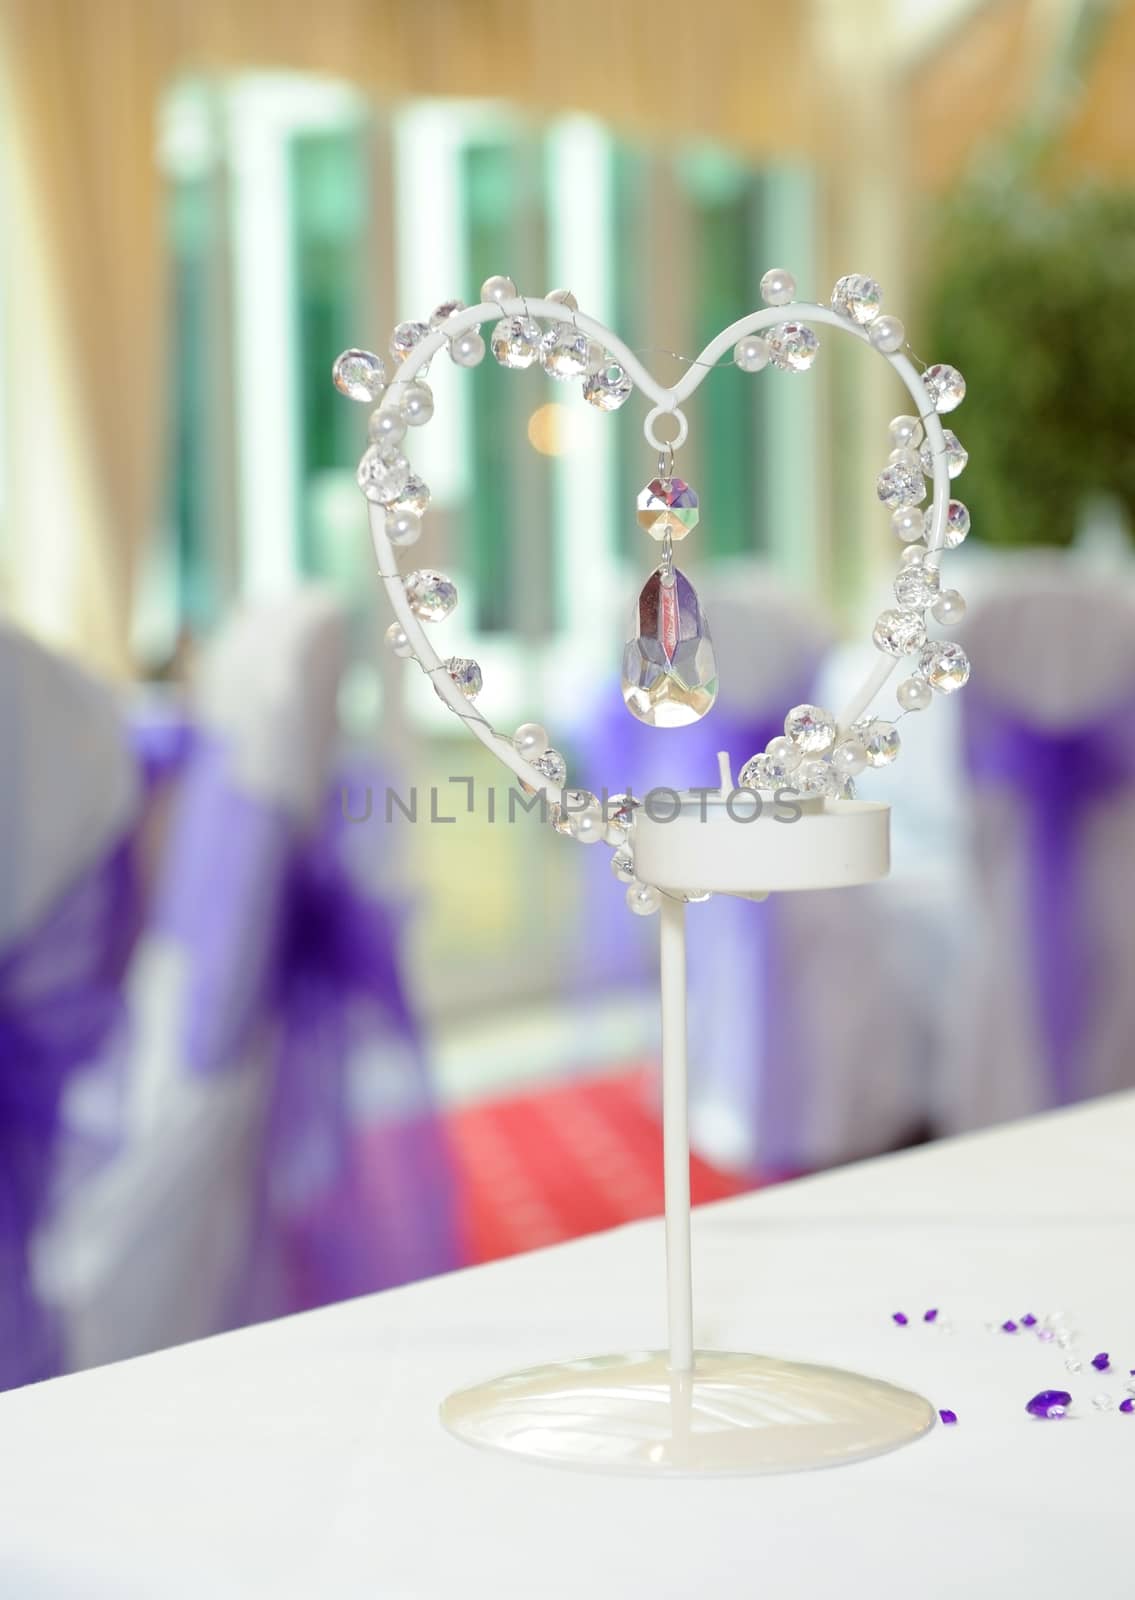 Heart shaped candle holder at wedding reception